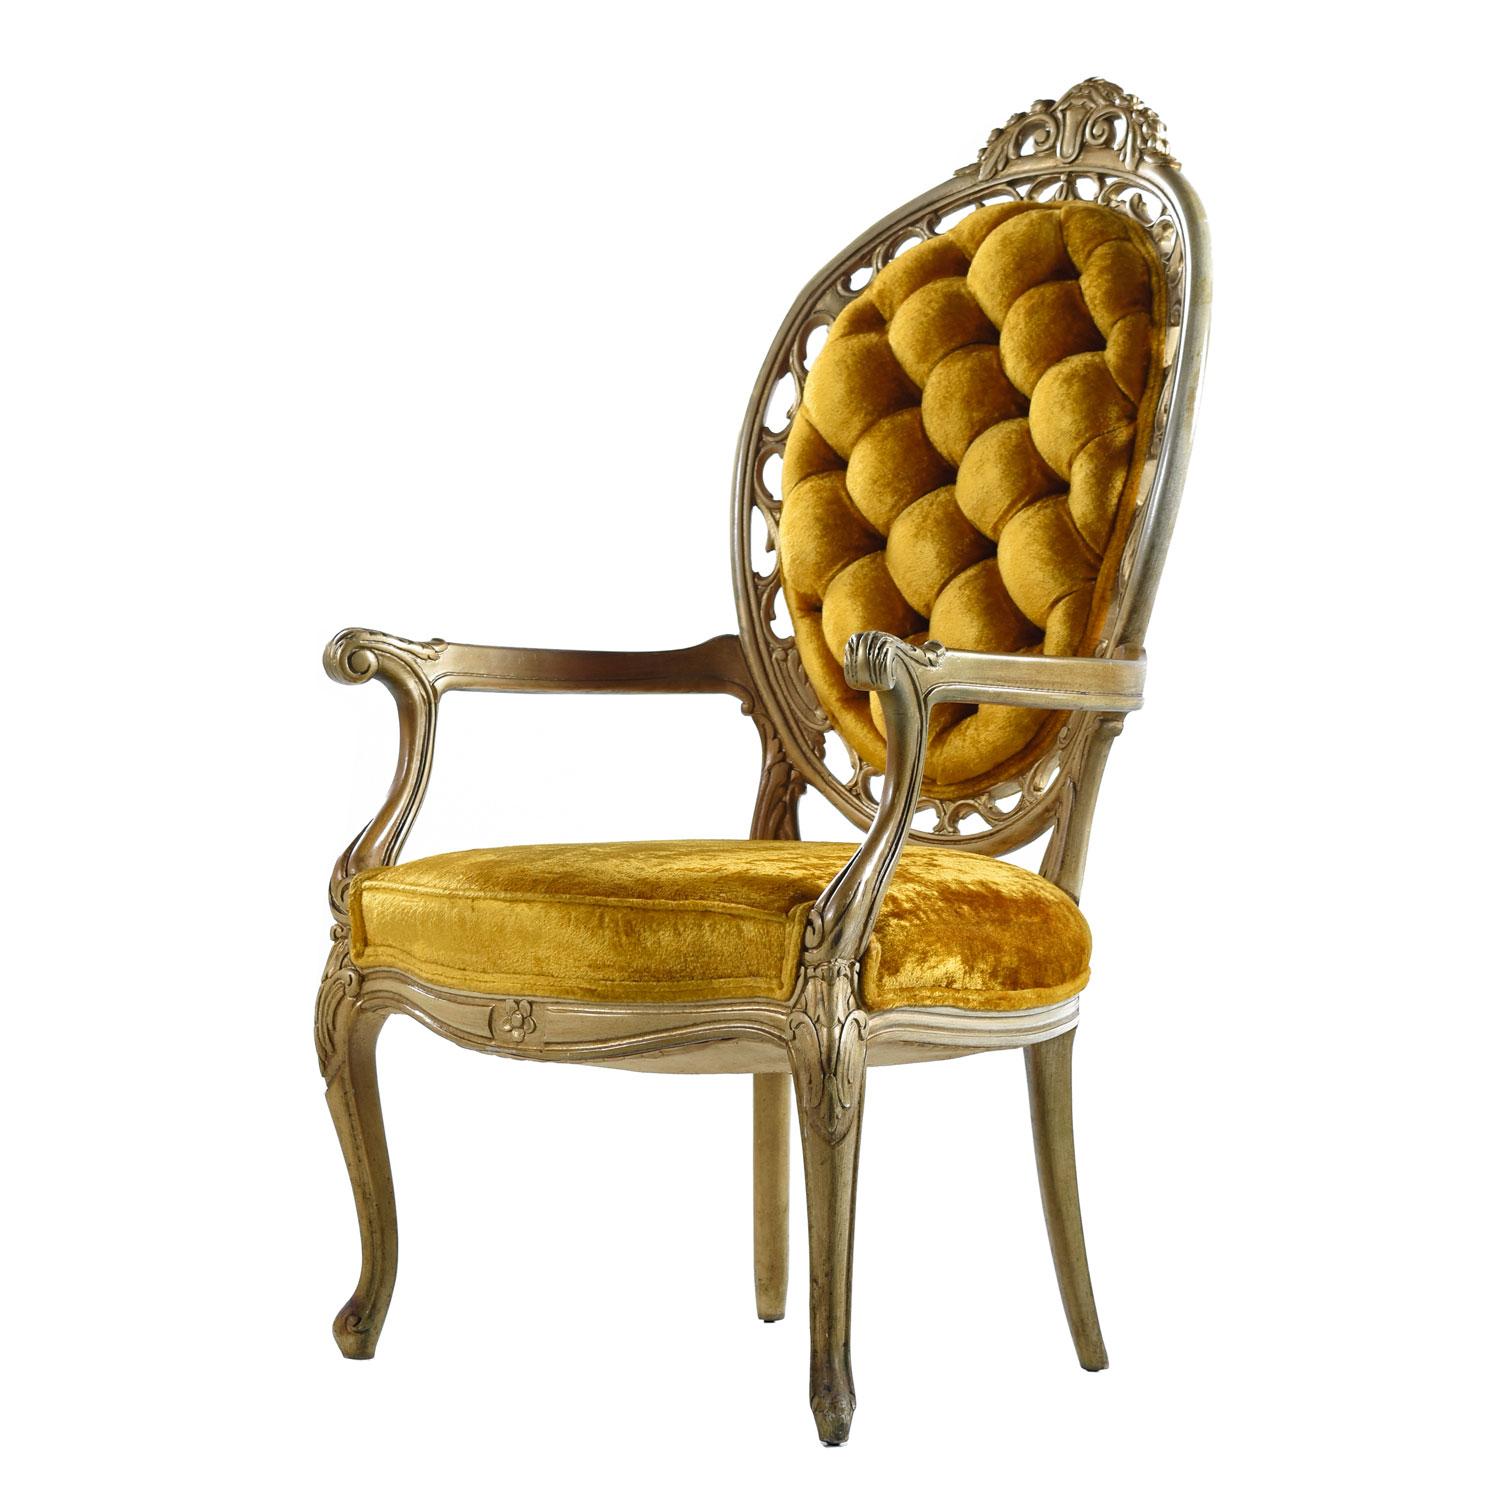 Brash, super-plush and regal with no apologies. Vintage 1960s marigold gold velvet colored armchairs. A harmonious and glitzy blend of Rococo, Hollywood Regency and Louis XV styles. Dozens of beautifully tailored, deeply tufted buttons. The carved